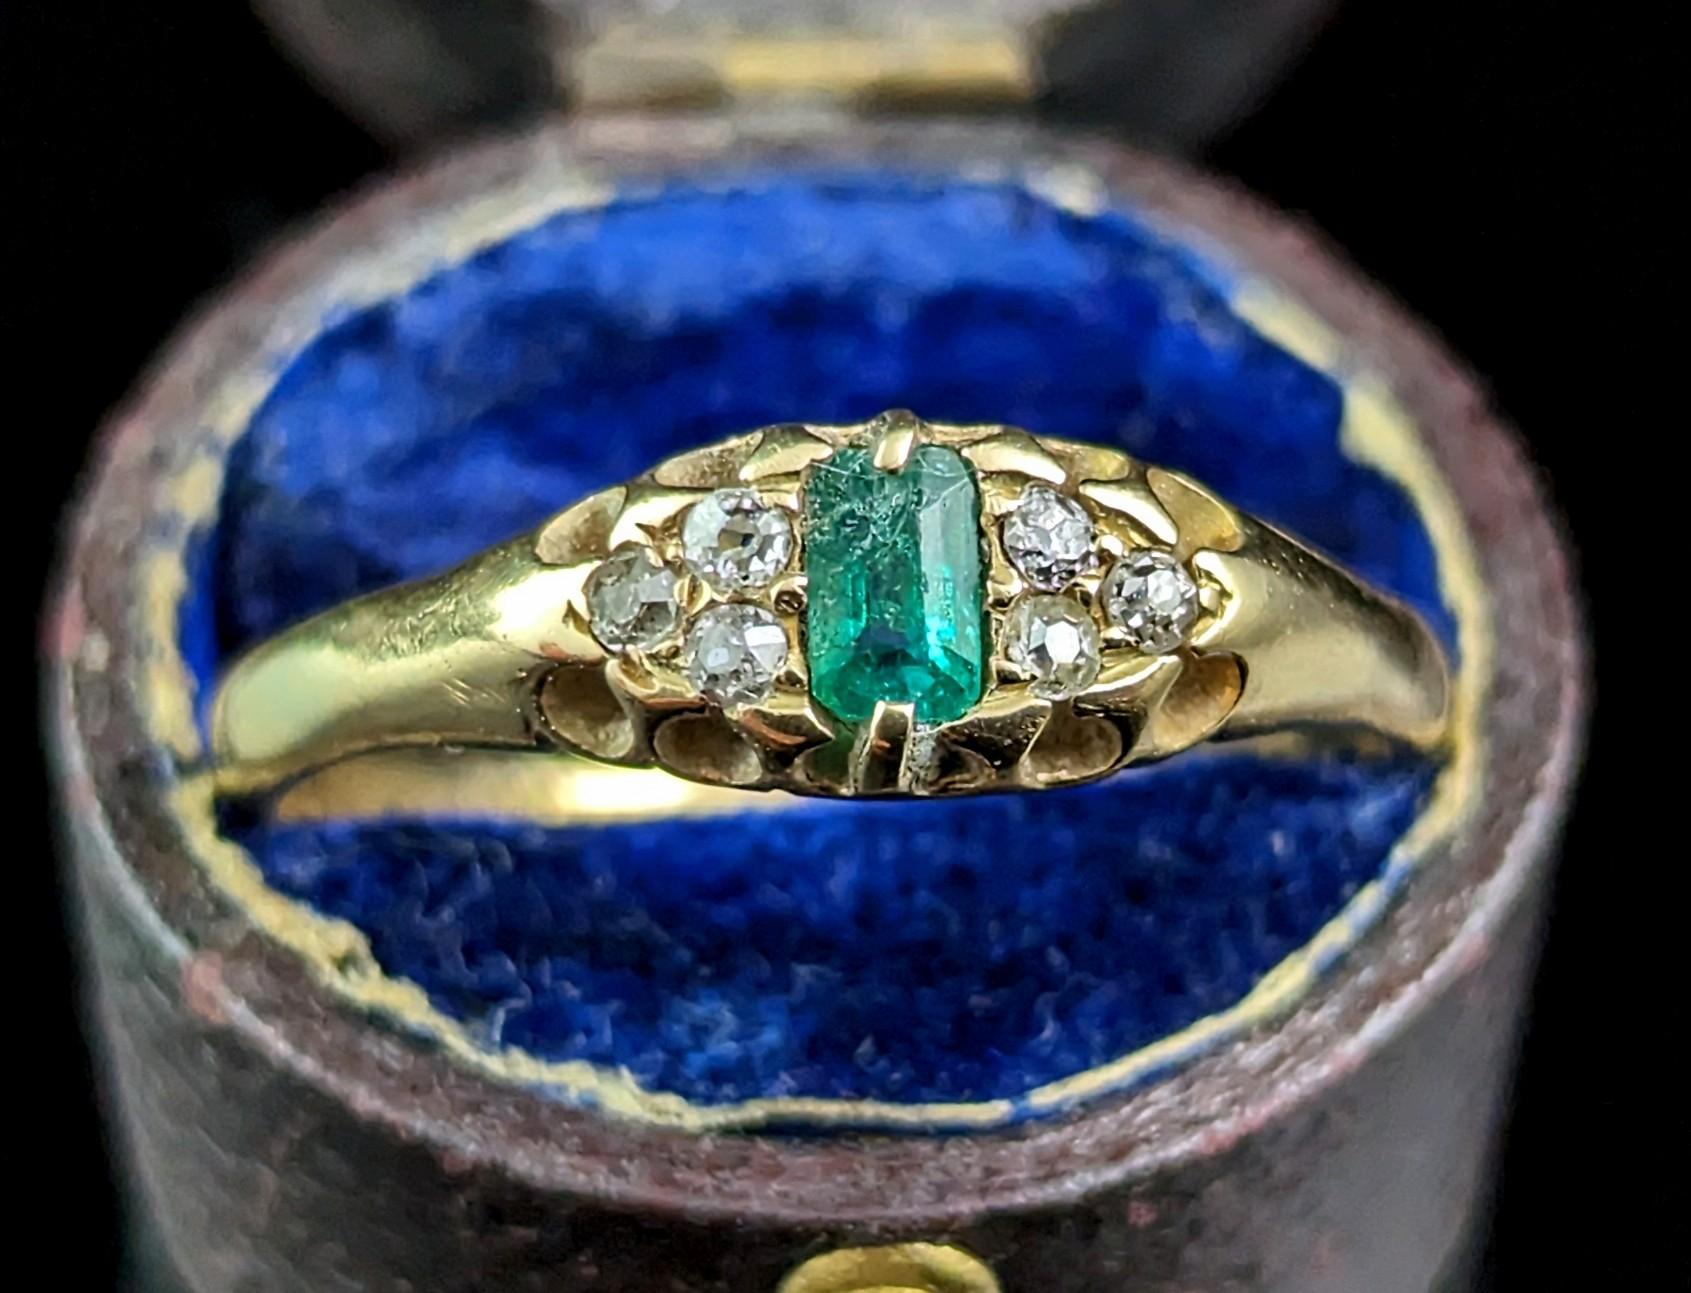 This antique Emerald and Diamond ring exudes beauty and luxury.

This impeccable ring is crafted in rich buttery 18ct gold with a smooth polished band and a boat head style setting.

The centre features a gorgeous emerald cut, lush and opulent green